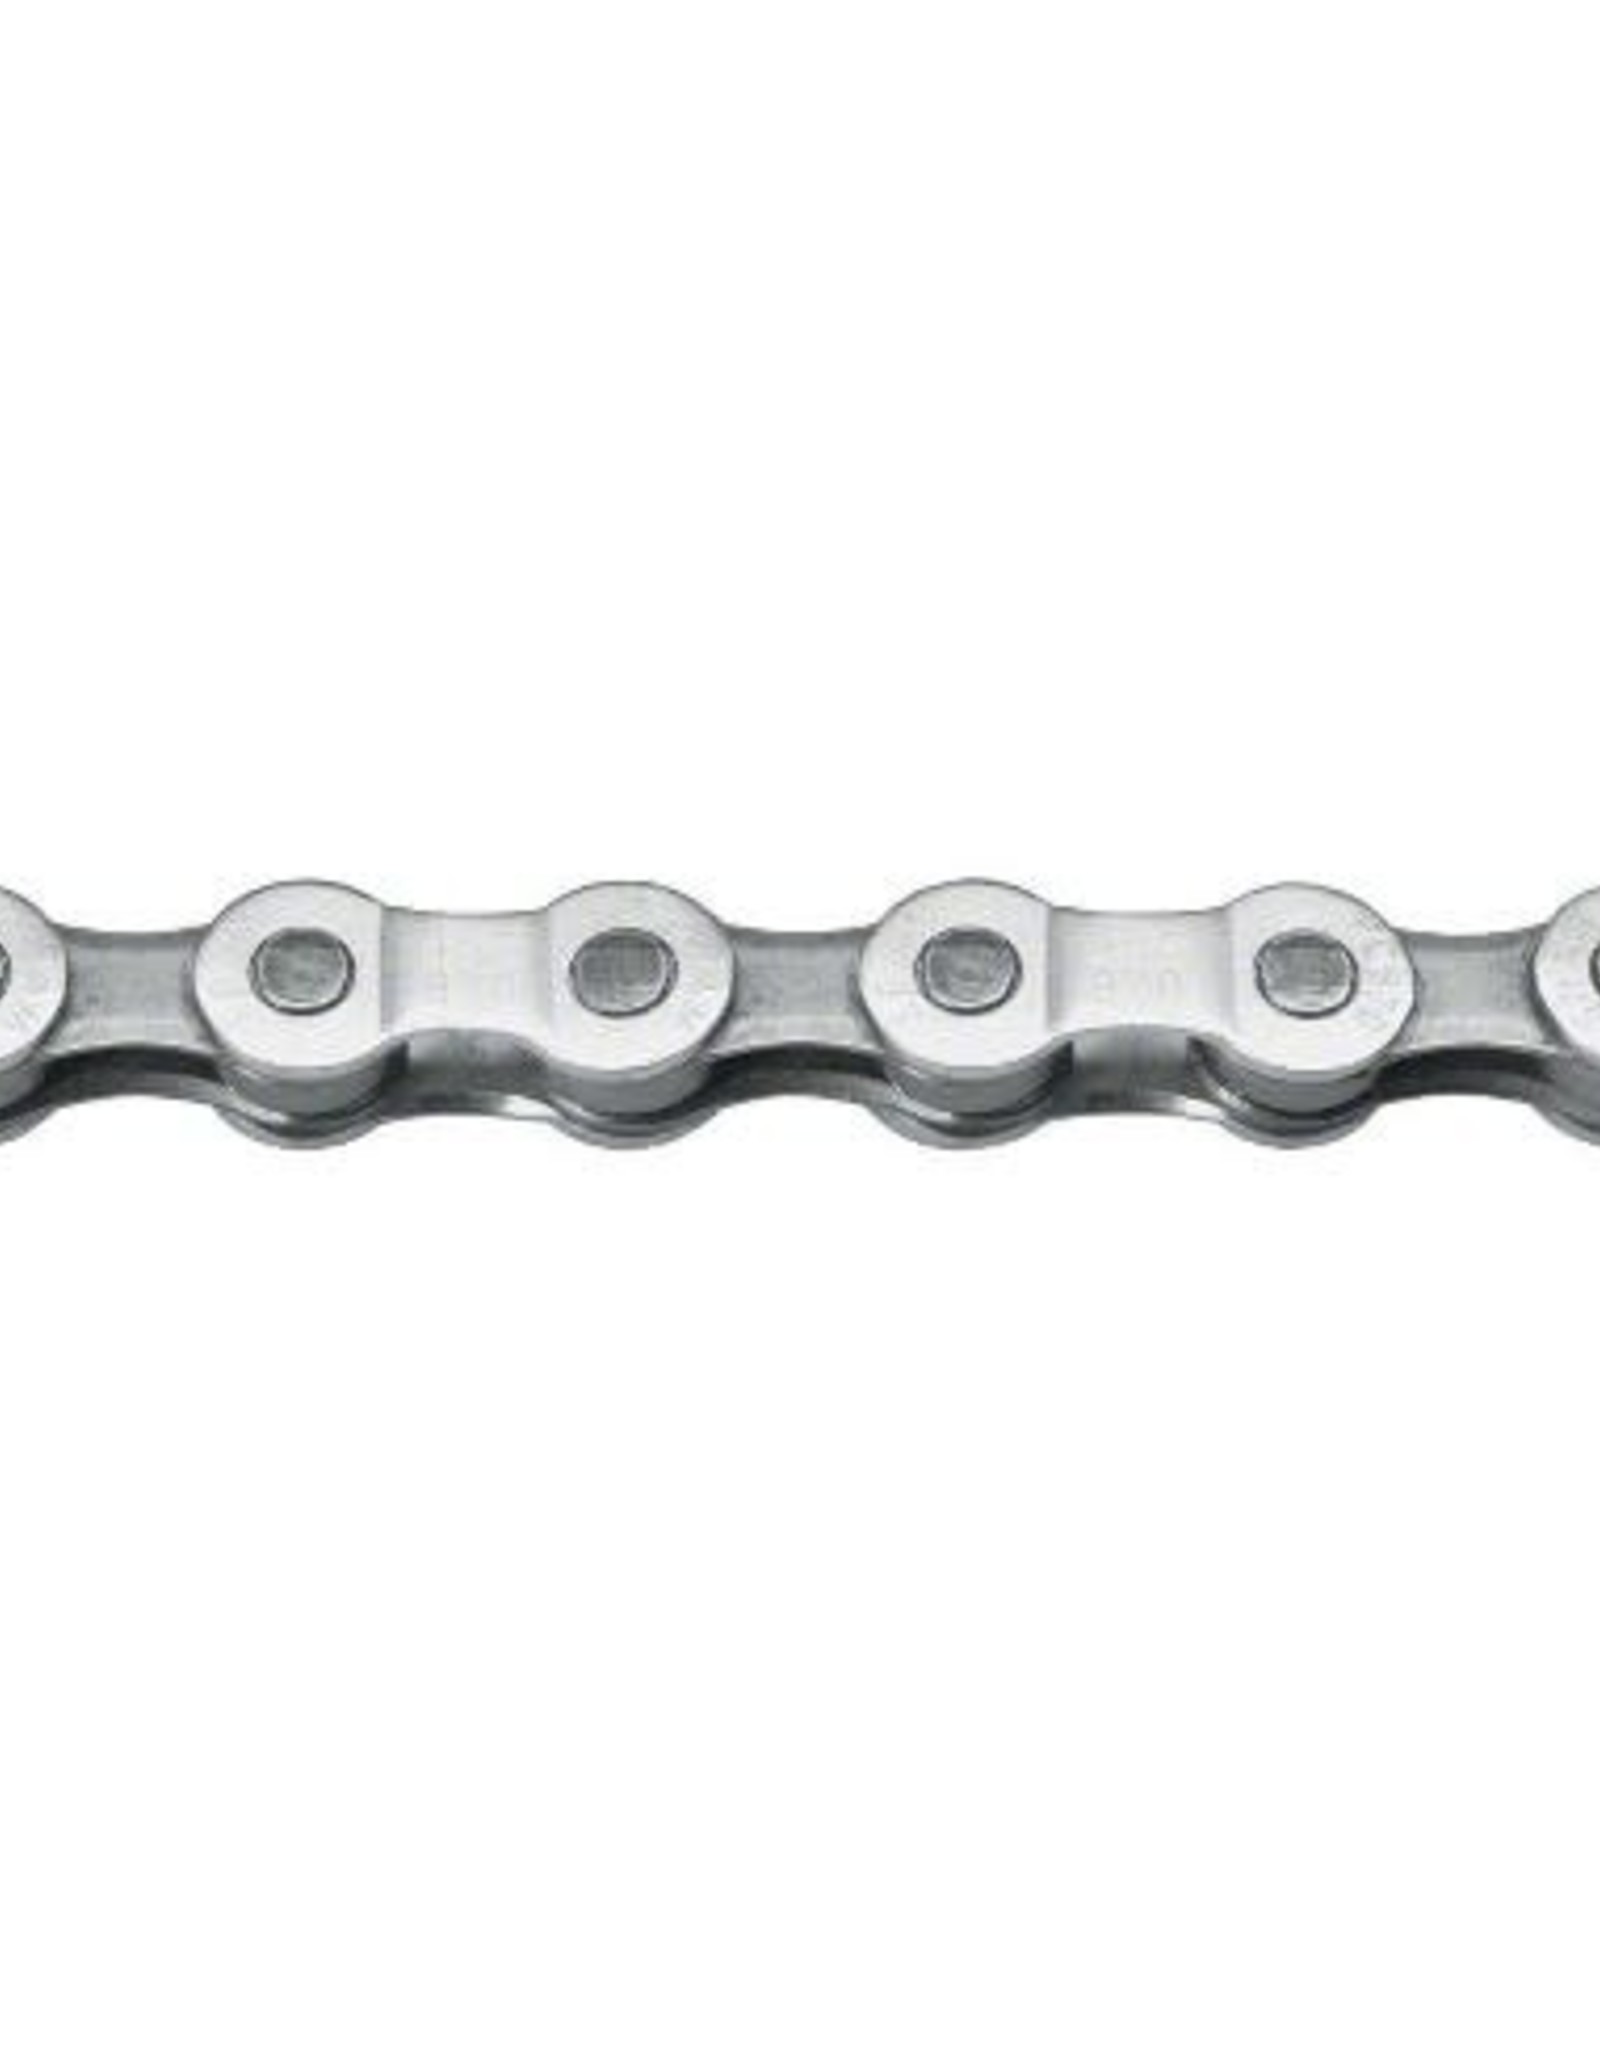 SRAM SRAM PC-971 9 speed Silver/Gray Chain with Powerlink